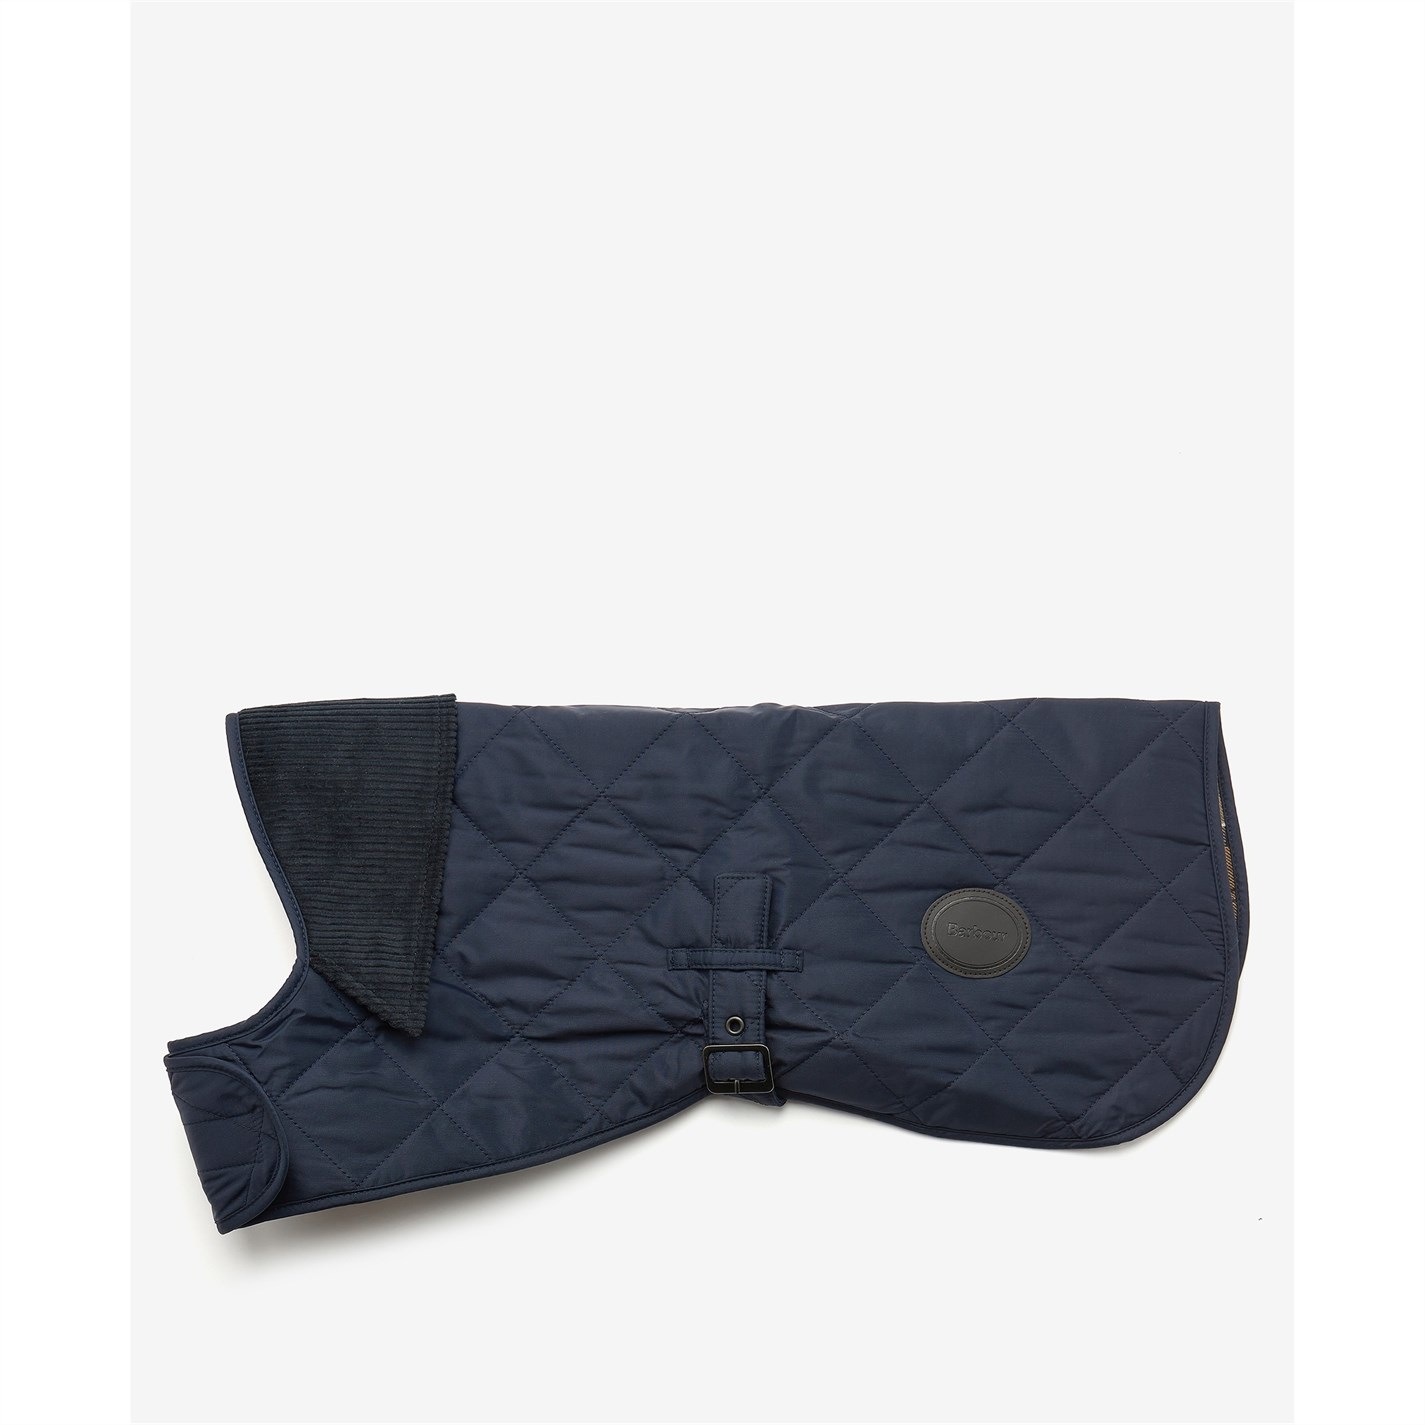 QUILTED DOG COAT - 1